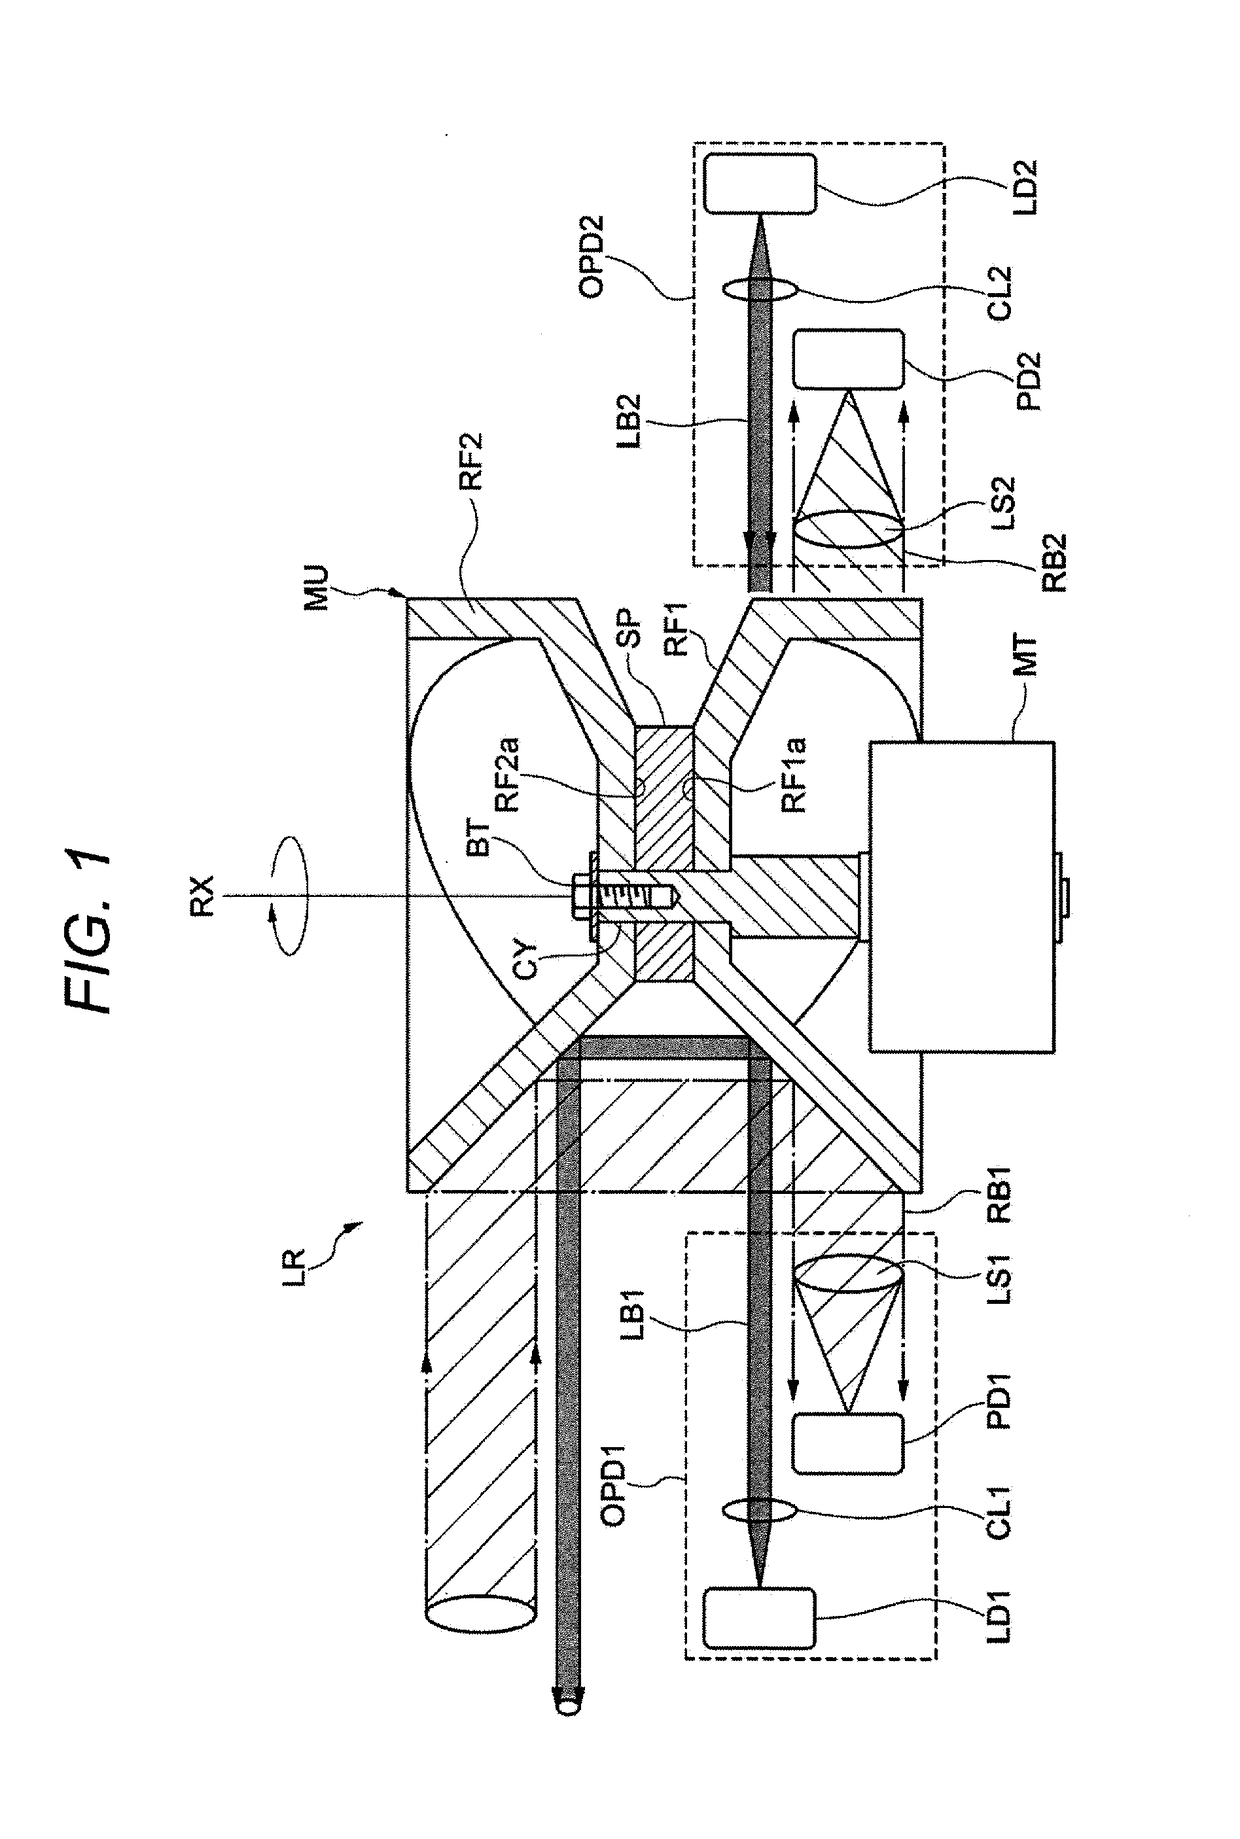 Optical scanning type object detection device